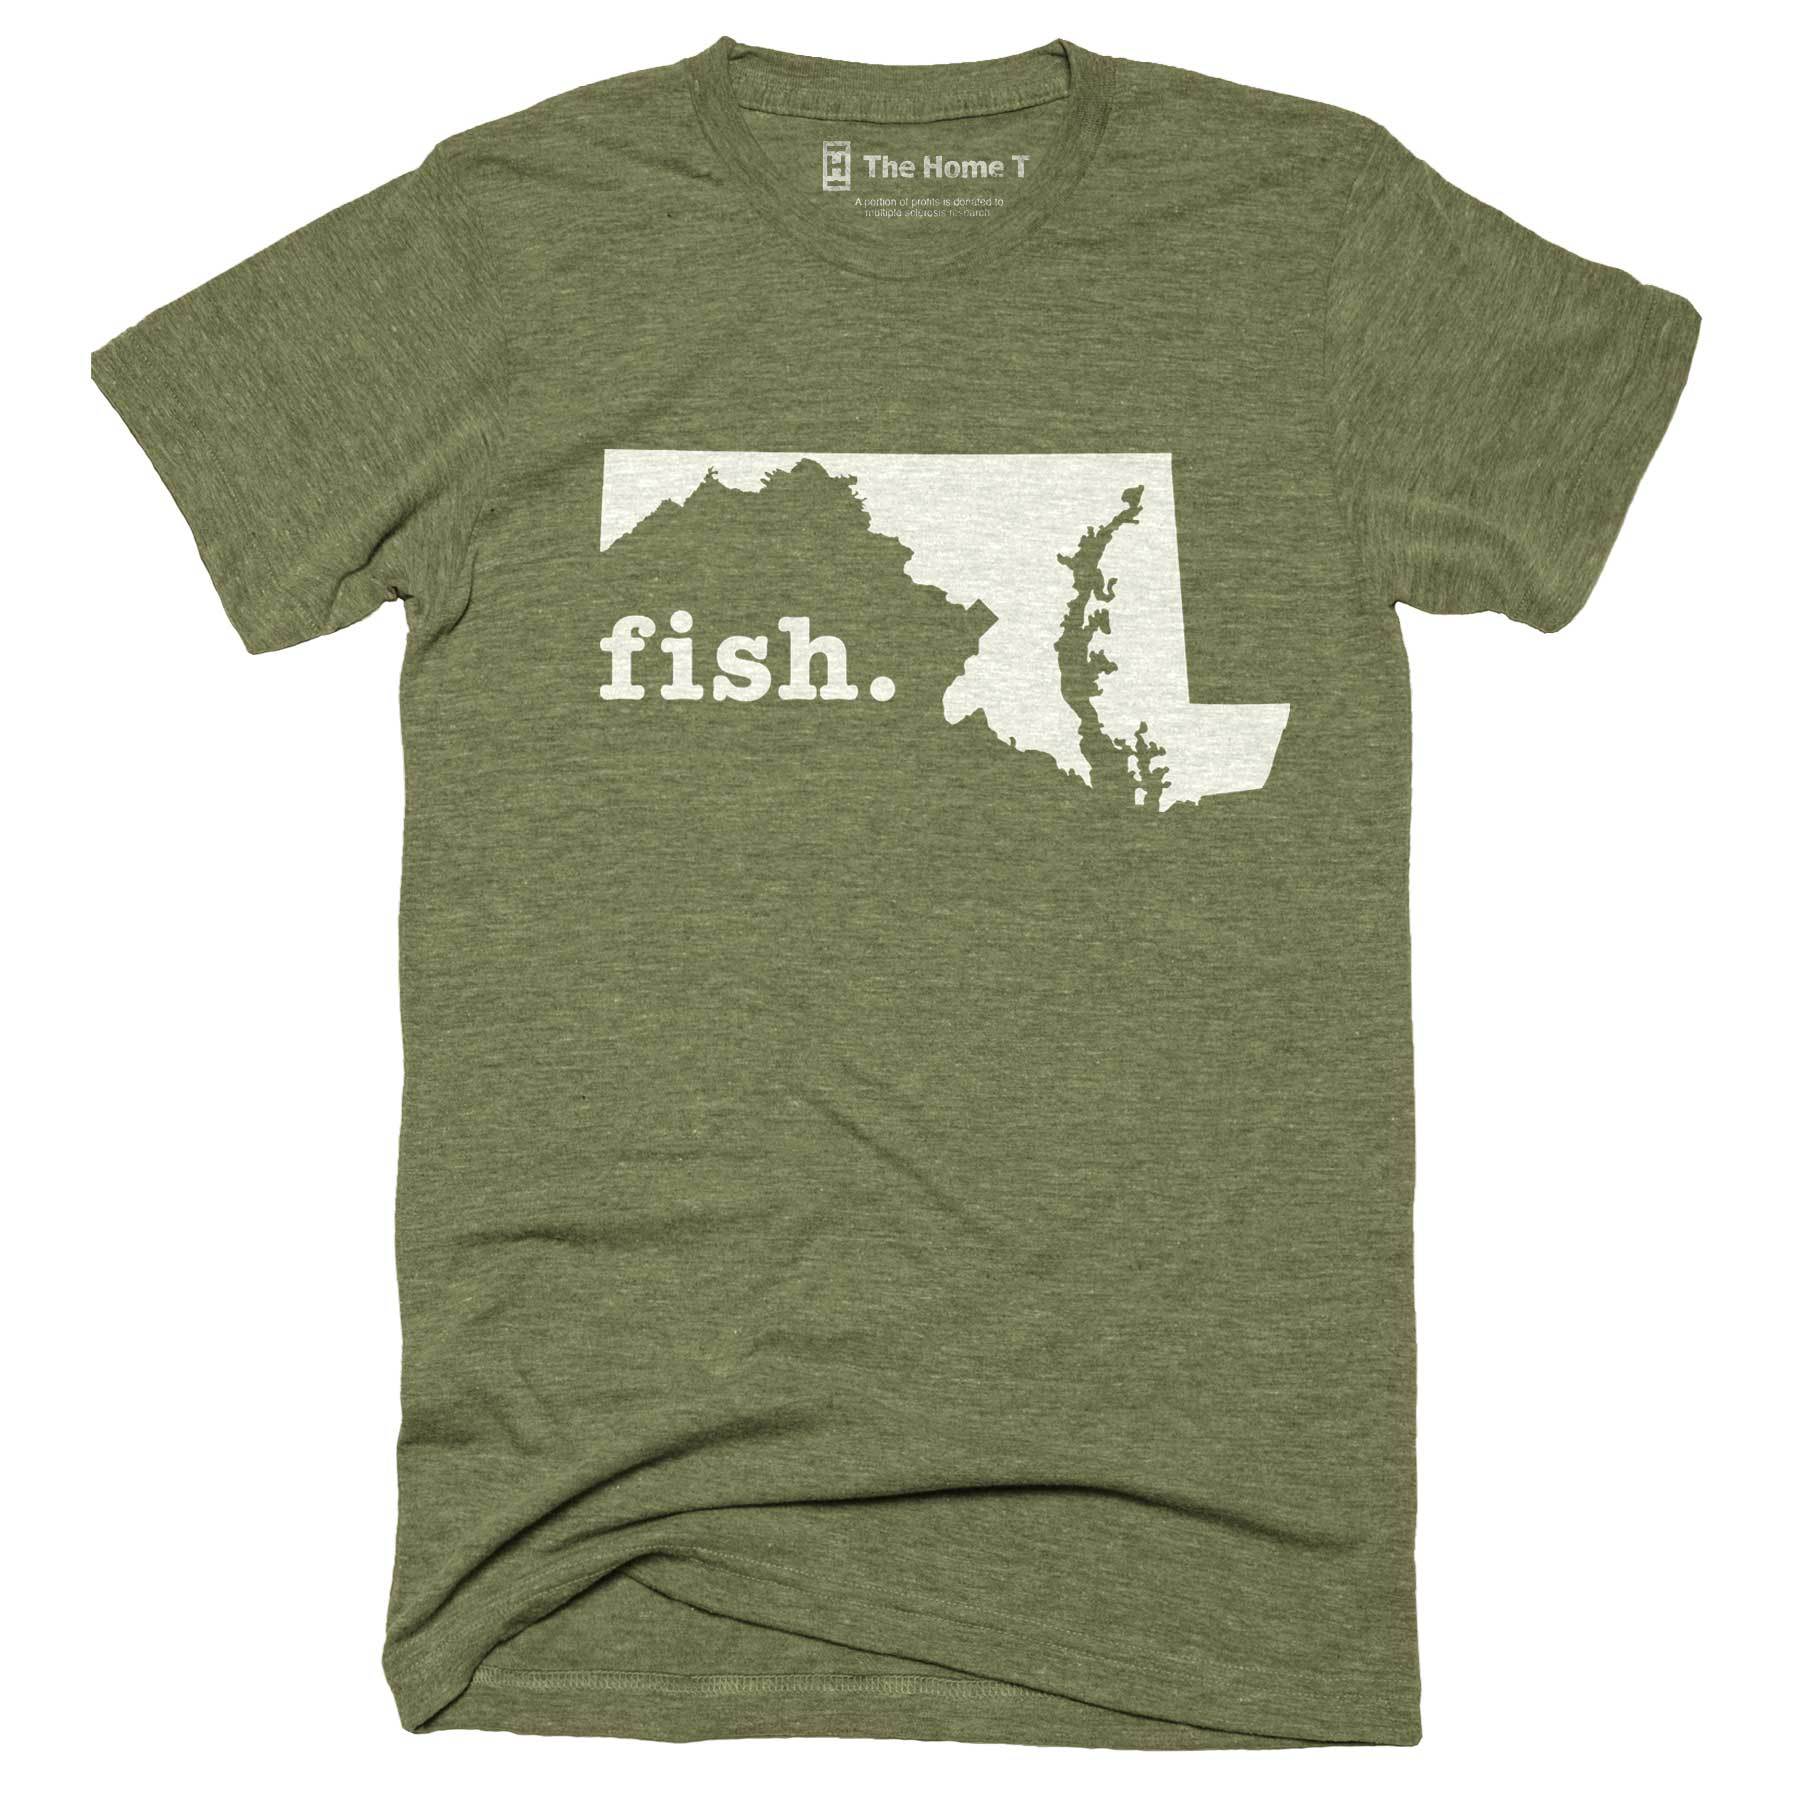 Maryland Fish Home T-Shirt Outdoor Collection The Home T XXL Army Green